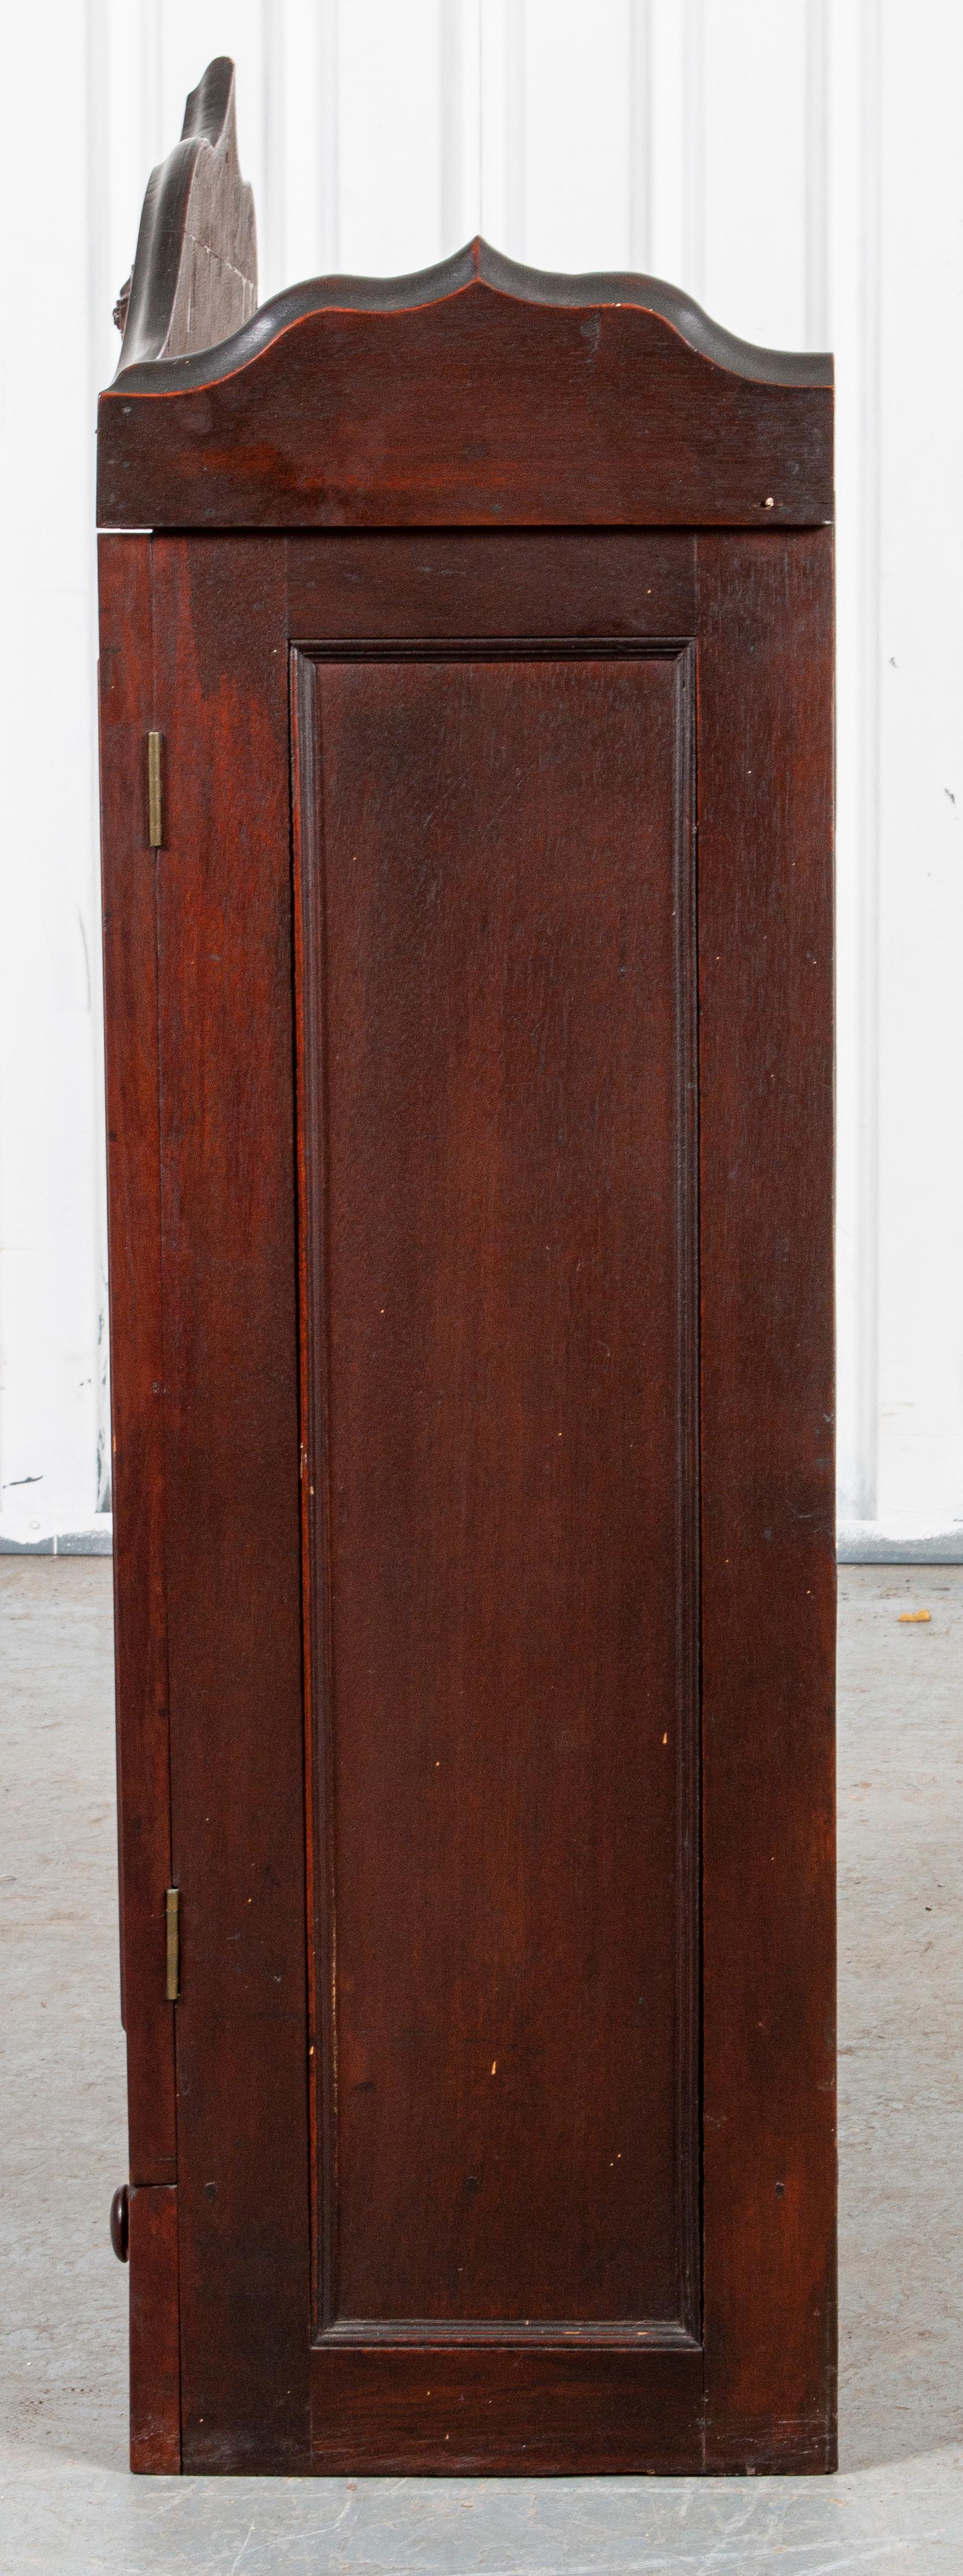 Carved oak cupboard with two glass doors and cartouche detail.